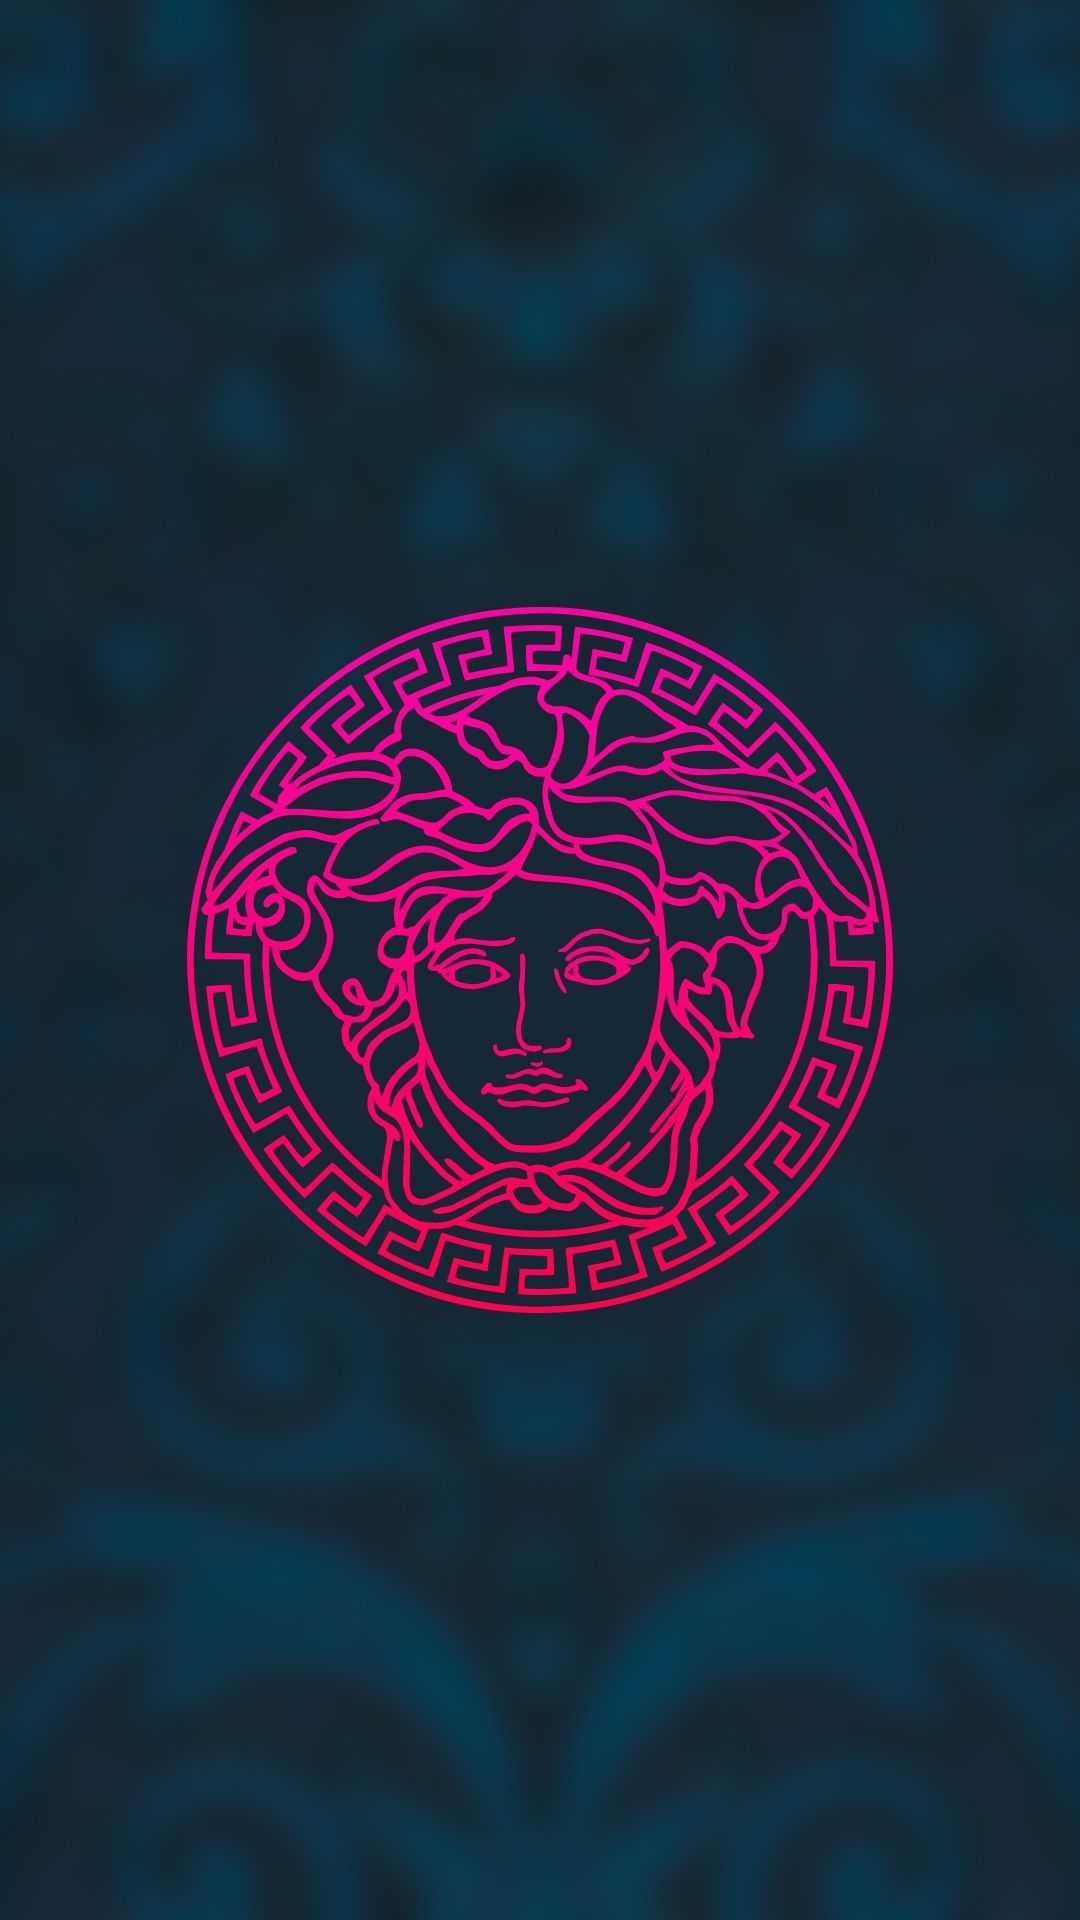 IPhone wallpaper versace with high-resolution 1080x1920 pixel. You can use this wallpaper for your iPhone 5, 6, 7, 8, X, XS, XR backgrounds, Mobile Screensaver, or iPad Lock Screen - Medusa